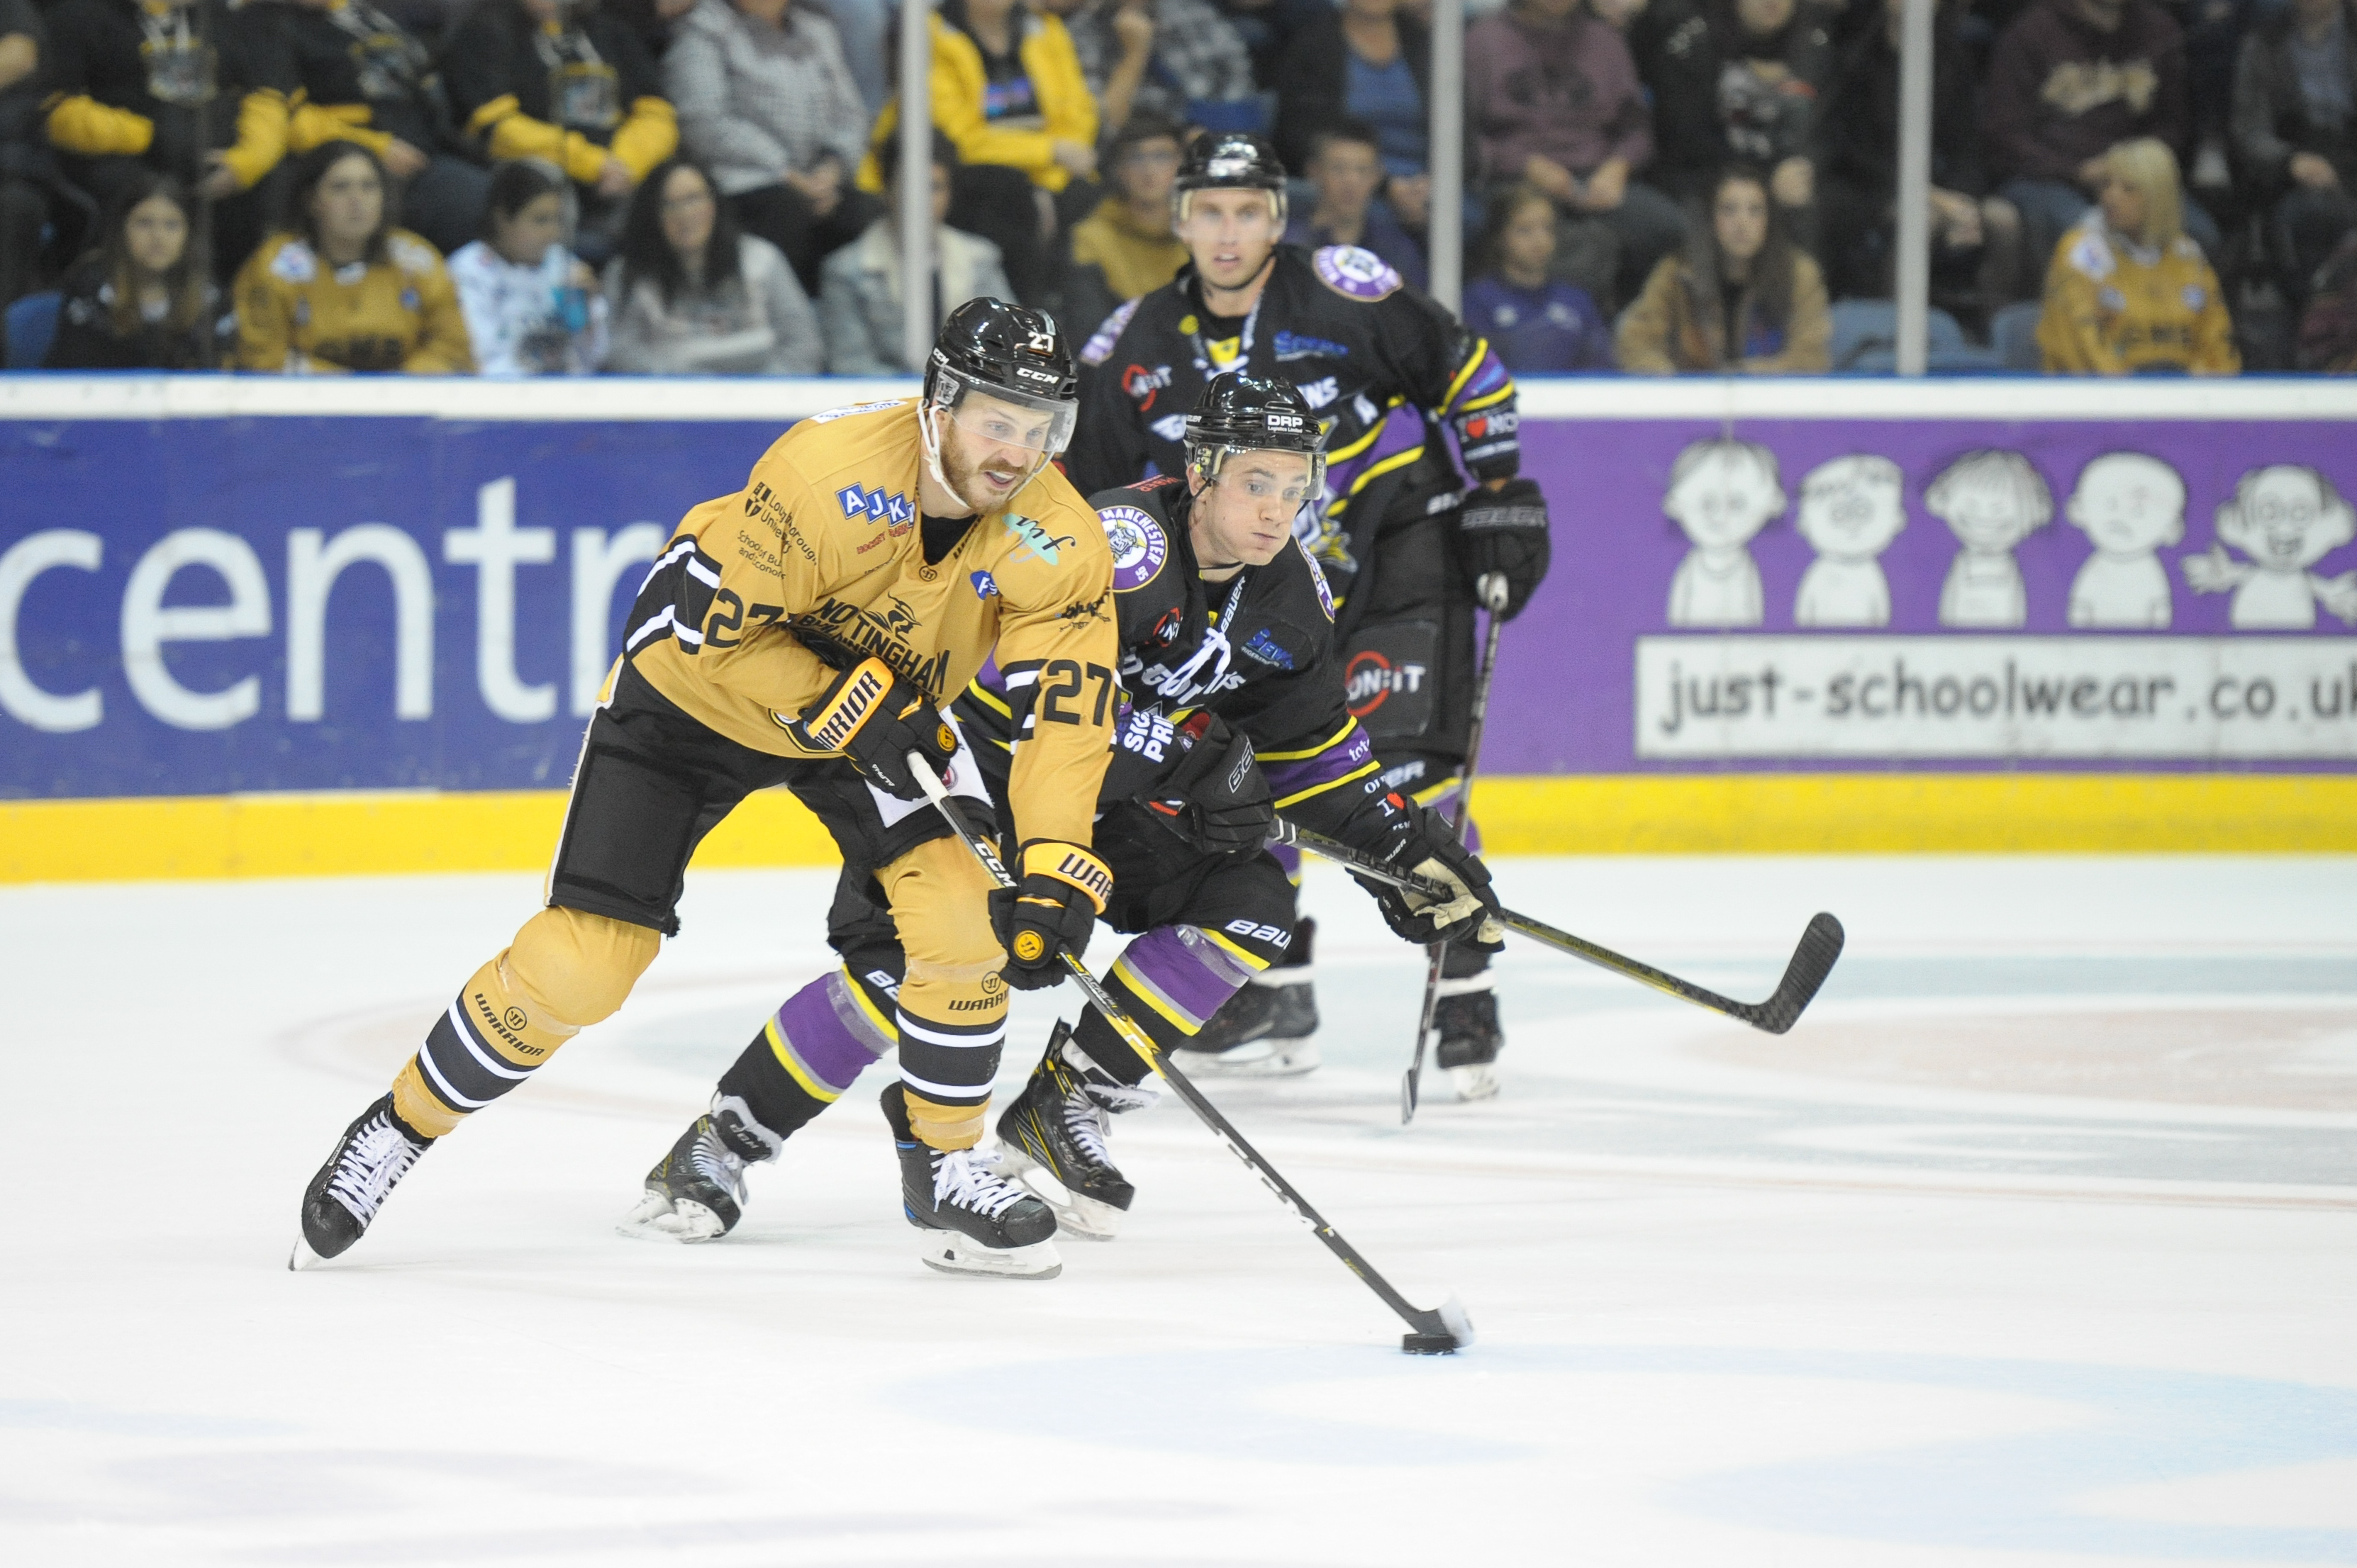 The Nottingham Panthers vs Manchester & Cardiff Top Image